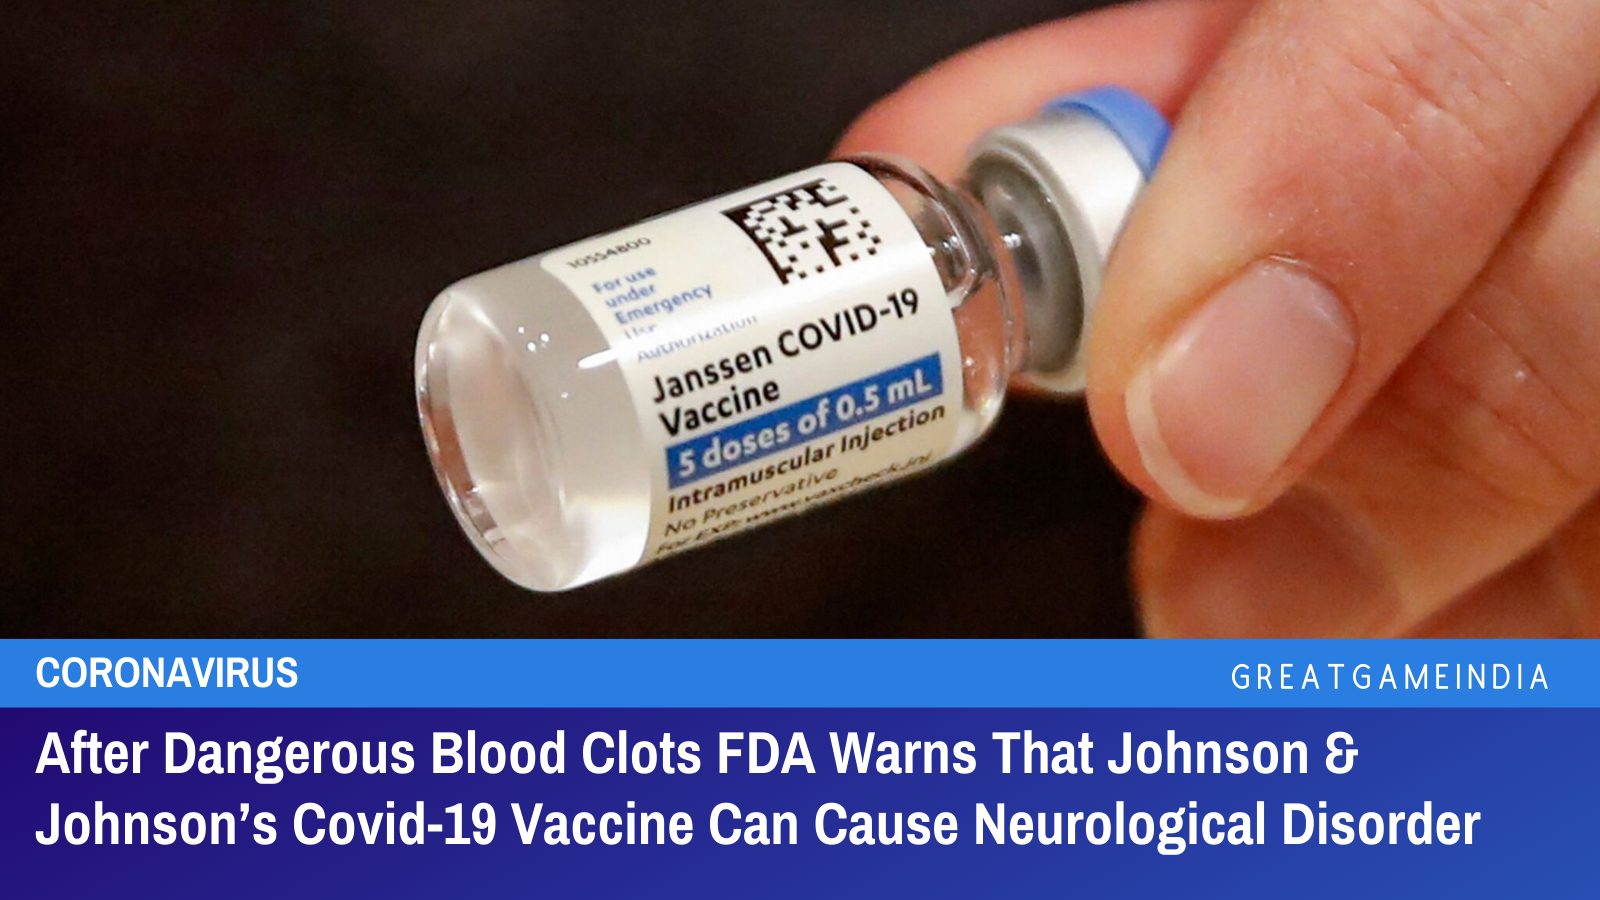 FDA Warns Johnson & Johnson COVID-19 Vaccine Can Cause Your Immune System To Attack Your Nervous System